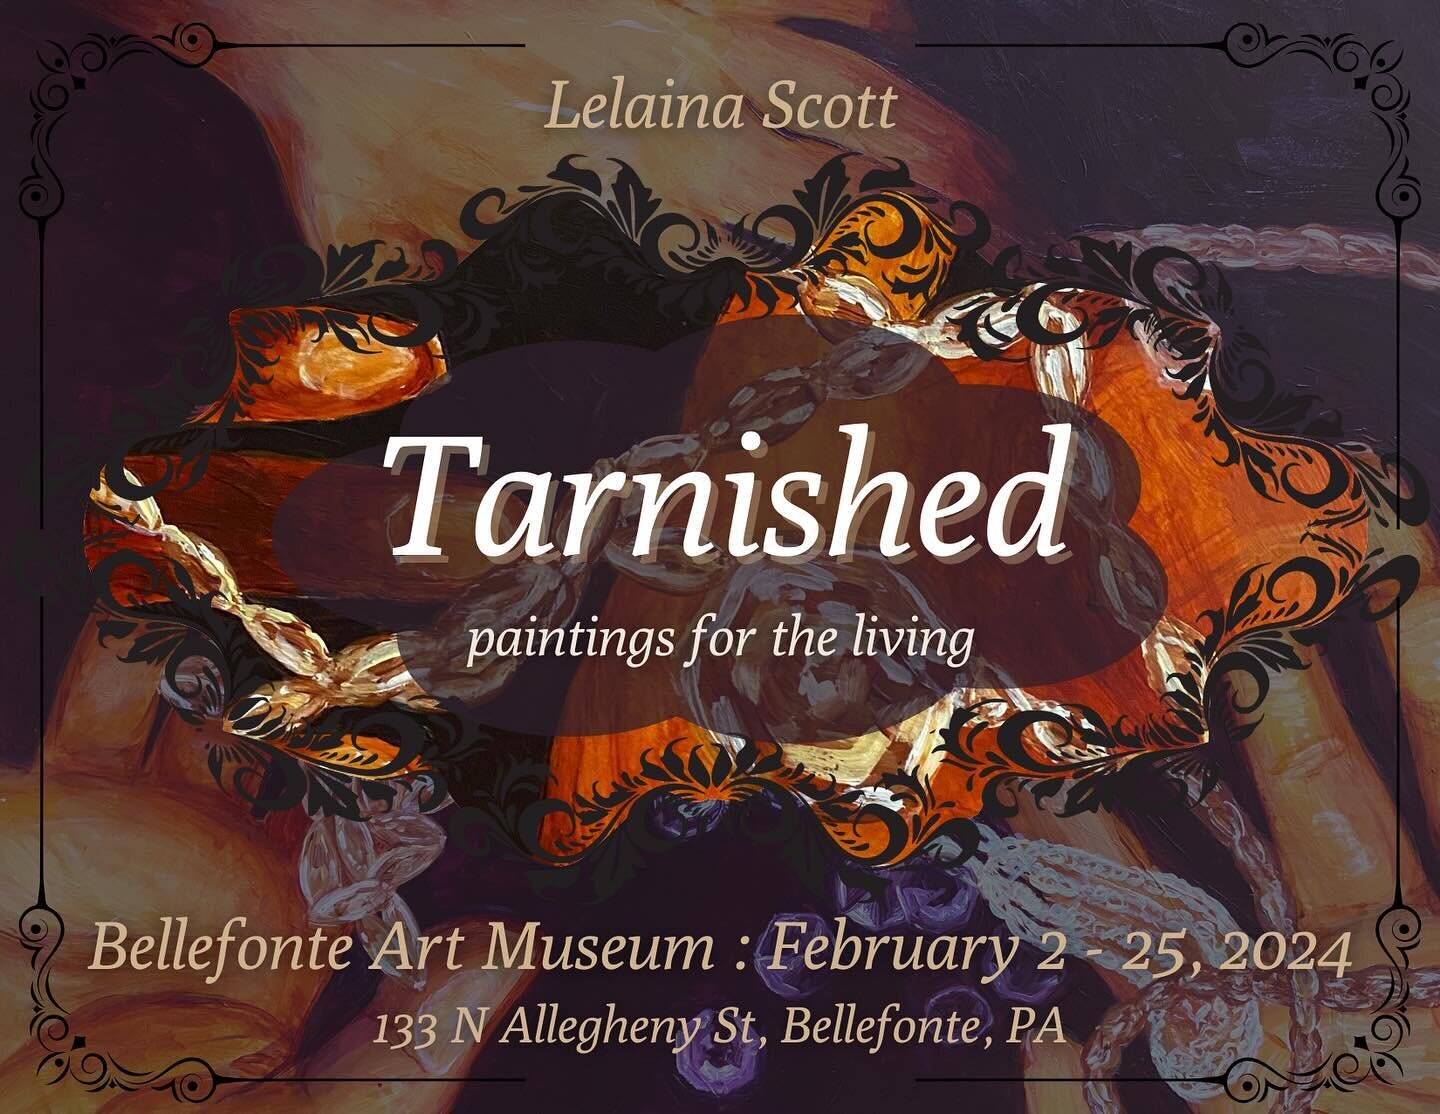 &ldquo;&lsquo;Tarnished: Paintings for the Living&rsquo; is an exploration into growing up with mental illness and navigation through day to day. Using colors and vintage pearls, gold and crystals, she connects those who view her art. It&rsquo;s huma